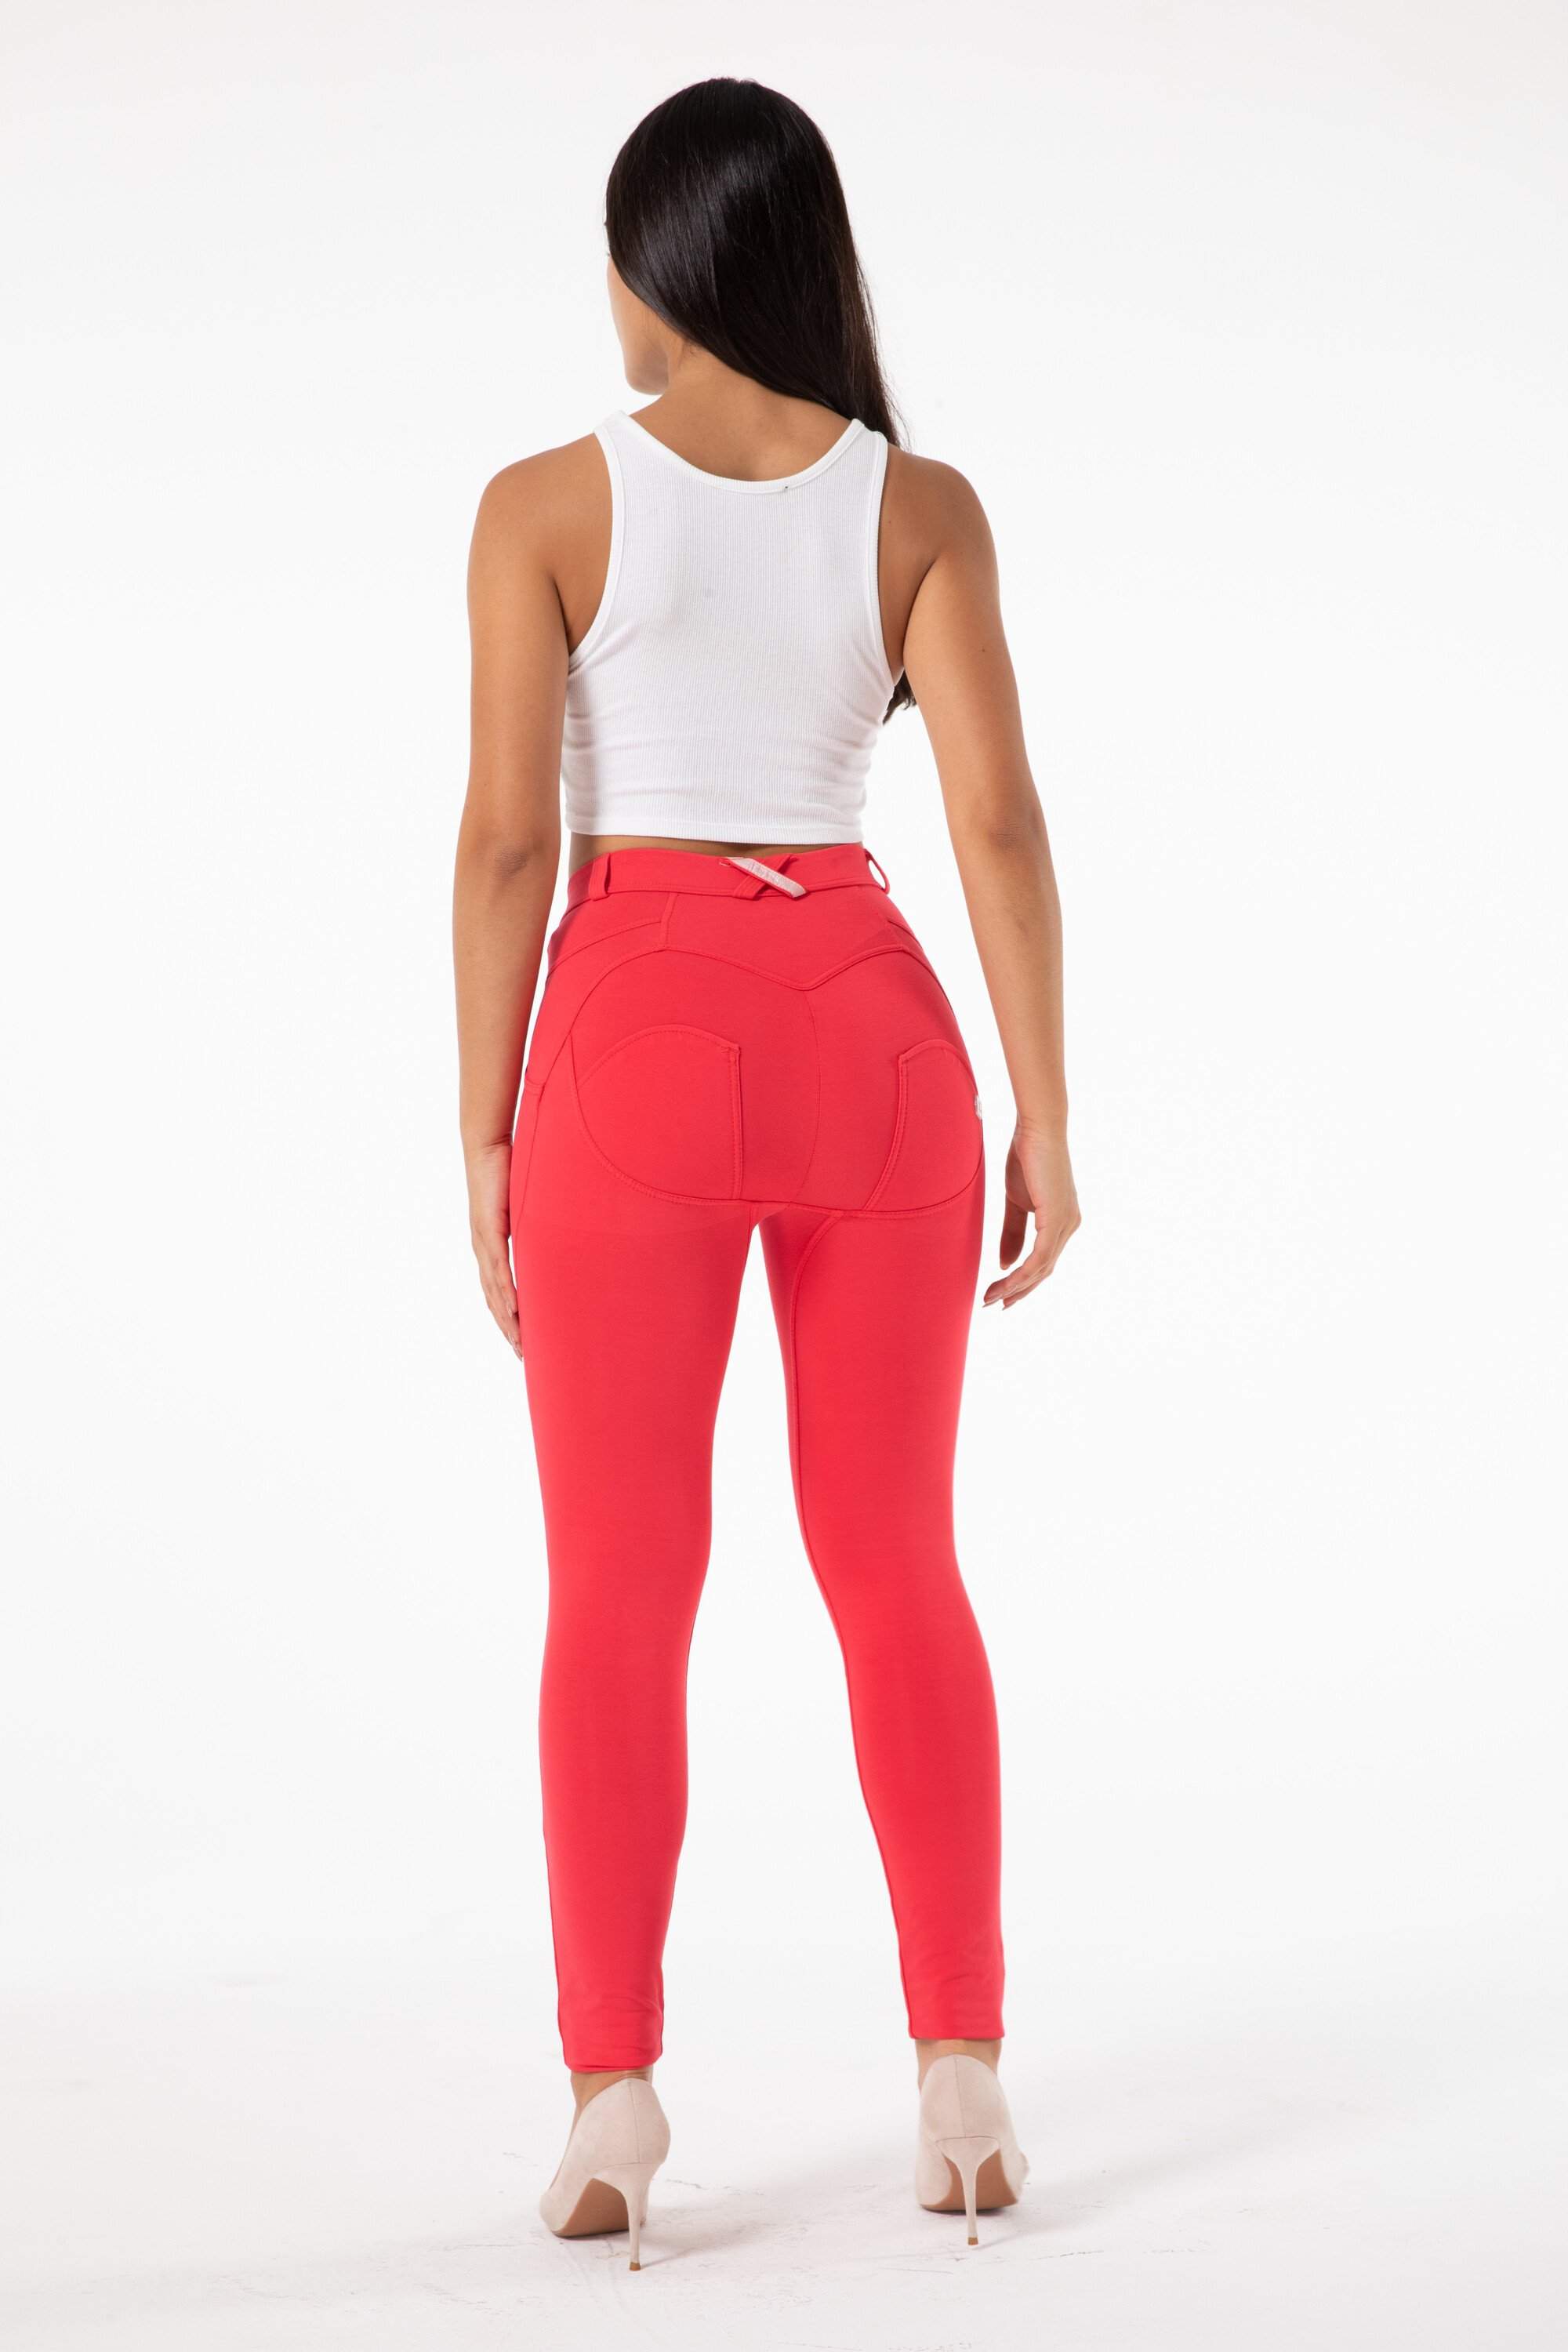 The Audacity Buttoned Watermelon Red Leggings for women